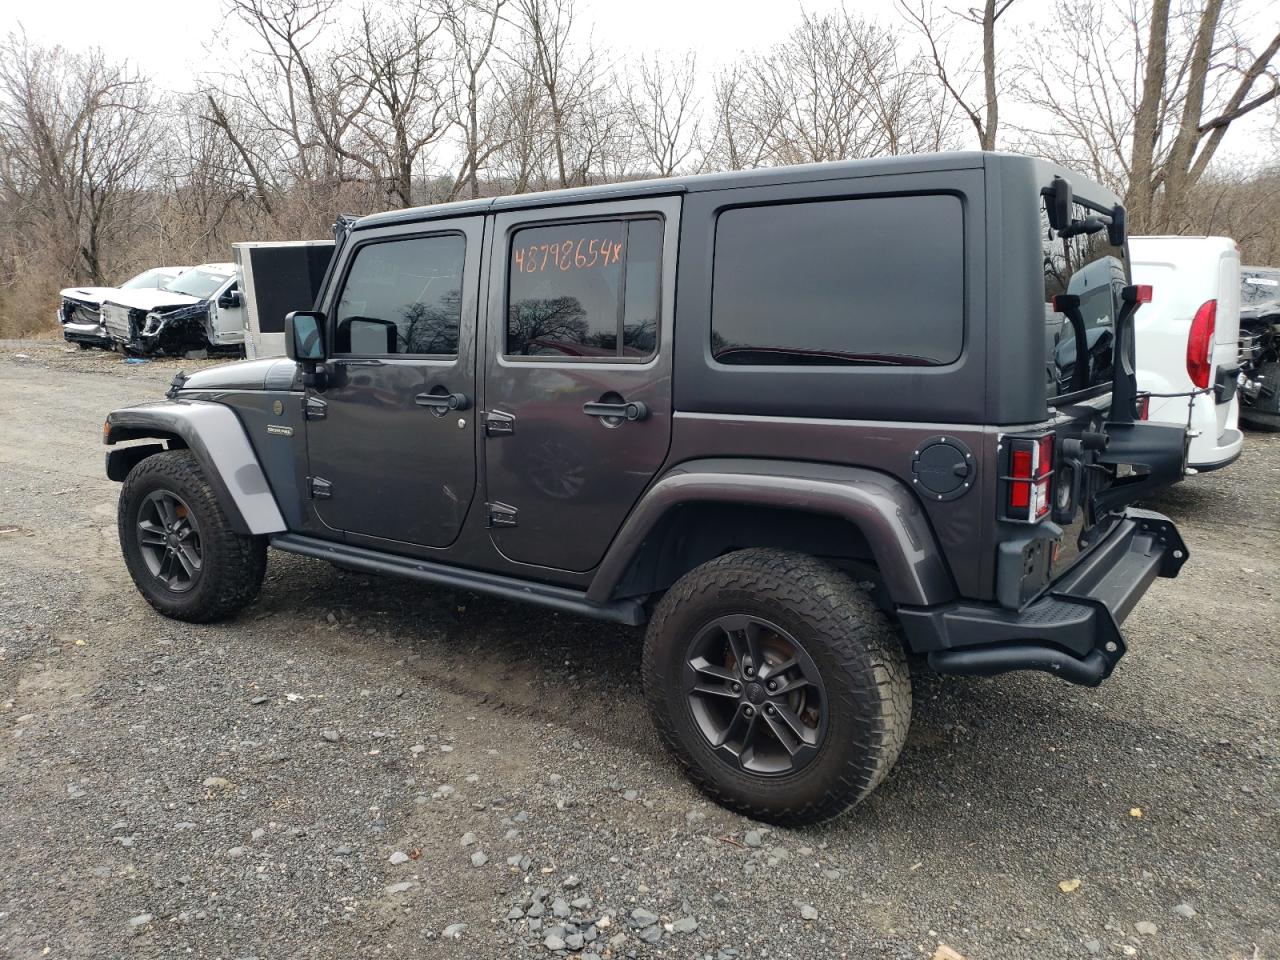 Salvage 2018 Jeep Wrangler Unlimited Sport